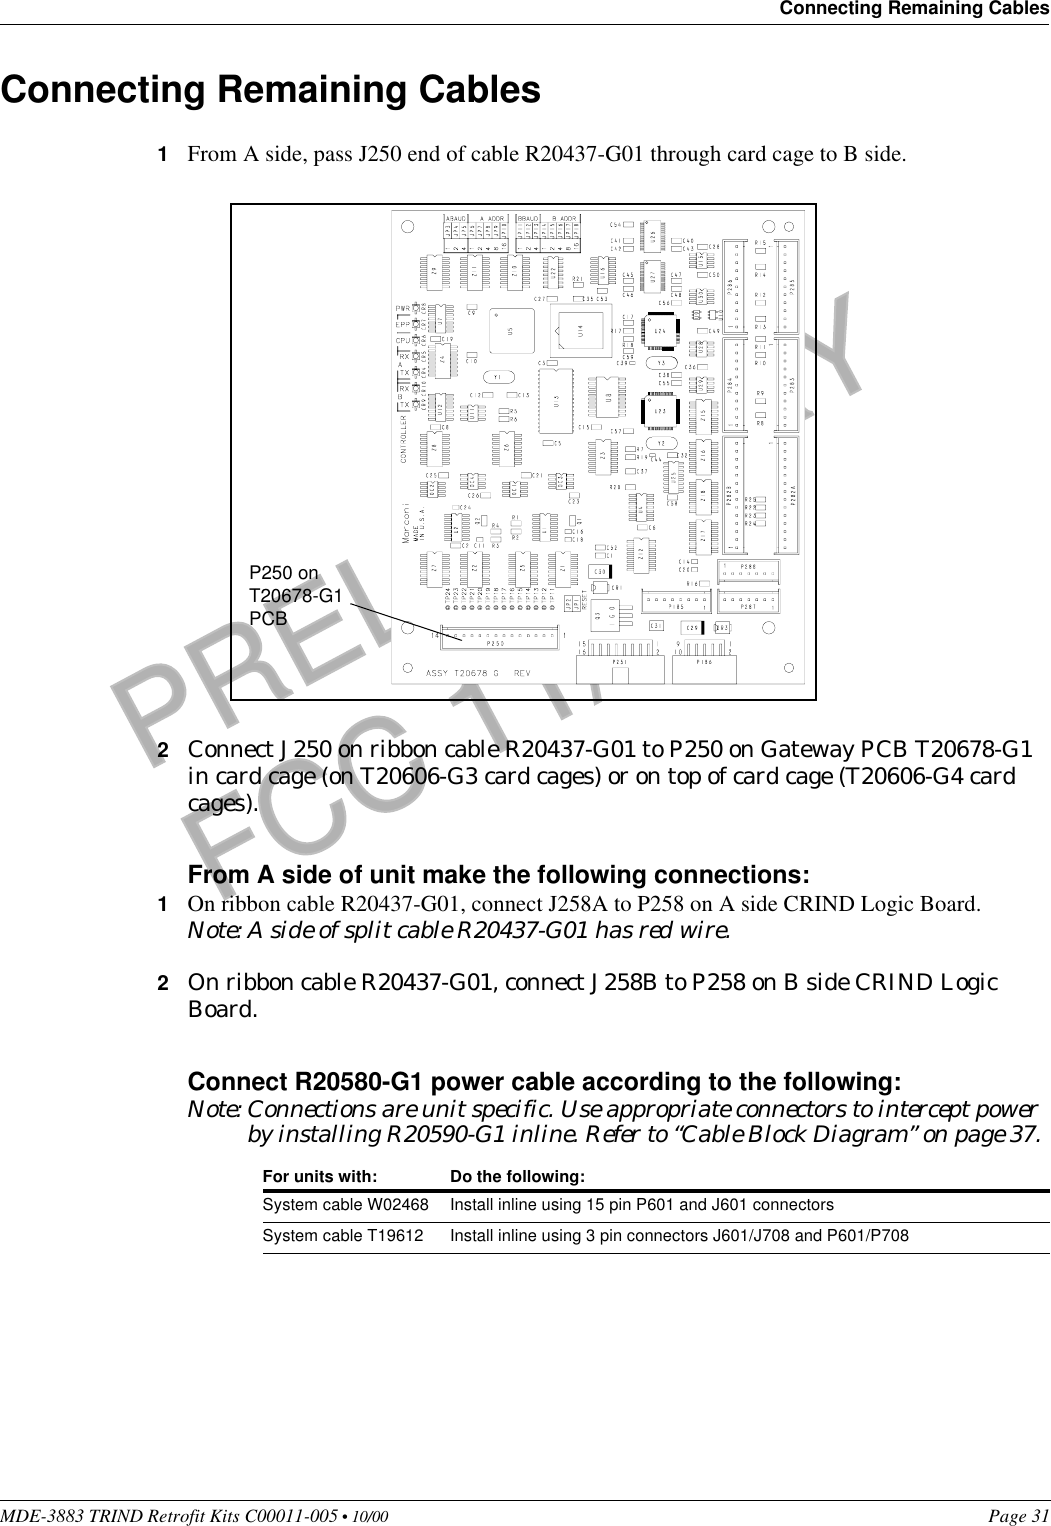 MDE-3883 TRIND Retrofit Kits C00011-005 • 10/00   Page 31Connecting Remaining CablesPRELIMINARYFCC 11/30Connecting Remaining Cables1From A side, pass J250 end of cable R20437-G01 through card cage to B side.2Connect J250 on ribbon cable R20437-G01 to P250 on Gateway PCB T20678-G1 in card cage (on T20606-G3 card cages) or on top of card cage (T20606-G4 card cages).From A side of unit make the following connections:1On ribbon cable R20437-G01, connect J258A to P258 on A side CRIND Logic Board.Note: A side of split cable R20437-G01 has red wire.2On ribbon cable R20437-G01, connect J258B to P258 on B side CRIND Logic Board.Connect R20580-G1 power cable according to the following:Note: Connections are unit specific. Use appropriate connectors to intercept power by installing R20590-G1 inline. Refer to “Cable Block Diagram” on page 37.For units with: Do the following:System cable W02468 Install inline using 15 pin P601 and J601 connectorsSystem cable T19612 Install inline using 3 pin connectors J601/J708 and P601/P708P250 on T20678-G1 PCB